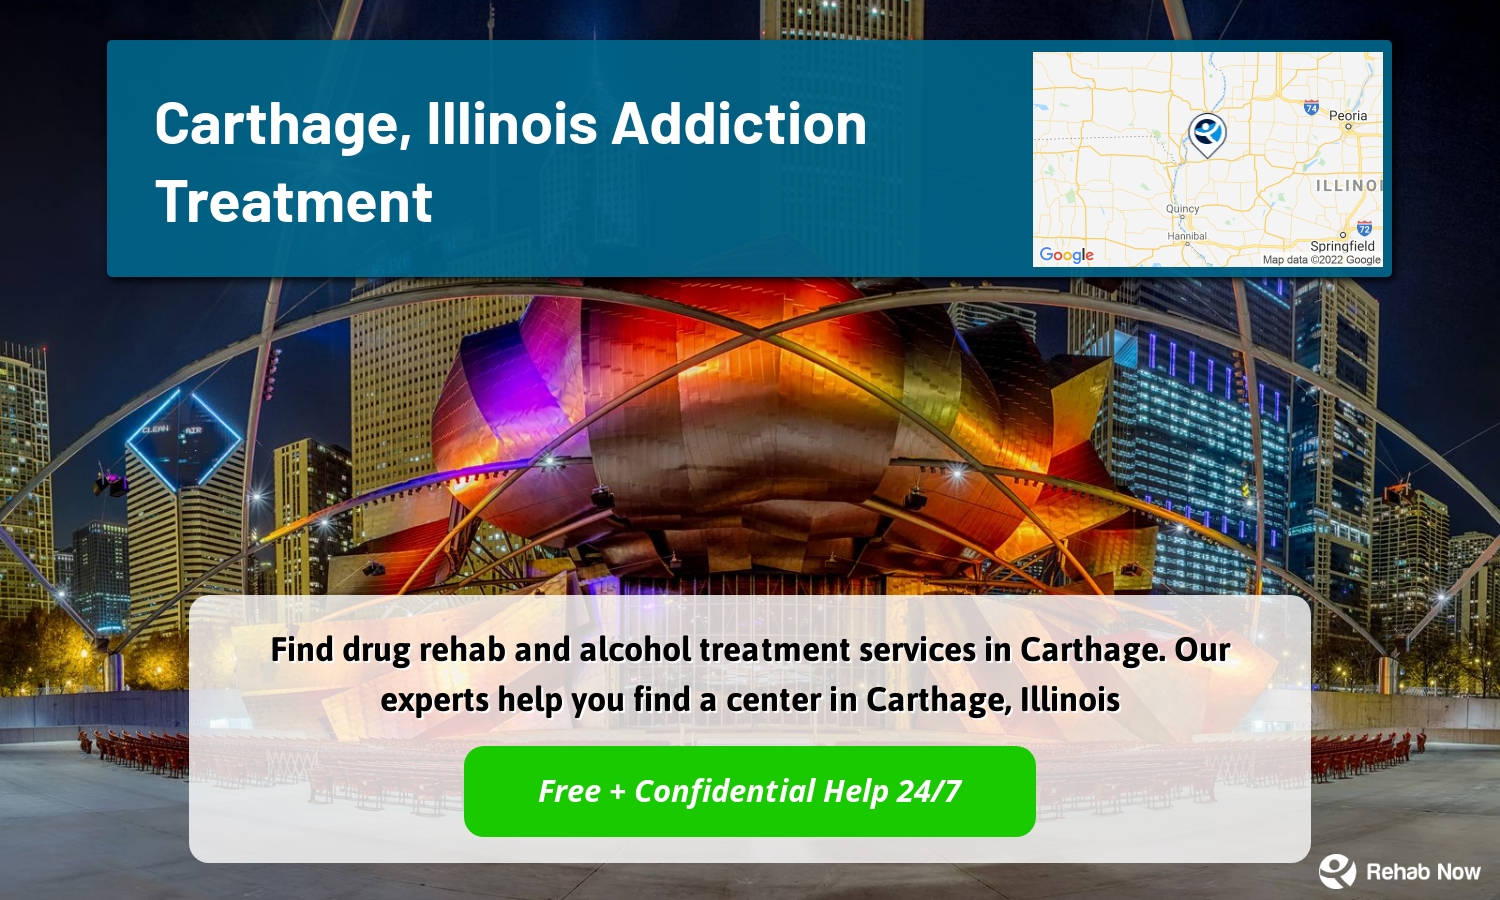 Find drug rehab and alcohol treatment services in Carthage. Our experts help you find a center in Carthage, Illinois